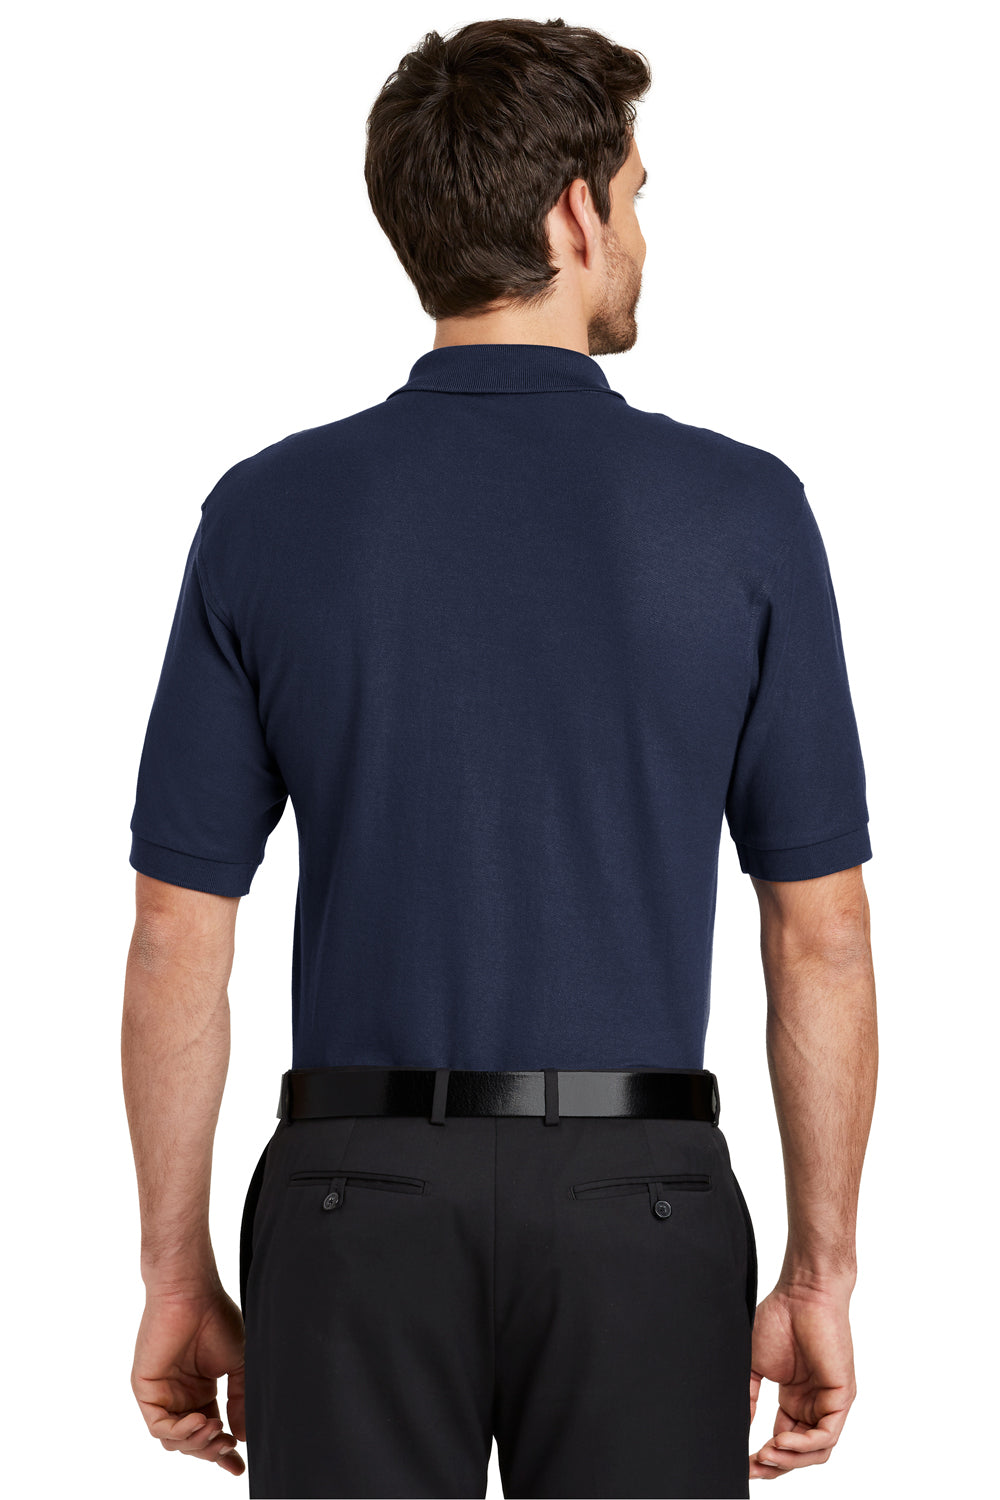 Port Authority K500P Mens Silk Touch Wrinkle Resistant Short Sleeve Polo Shirt w/ Pocket Navy Blue Back